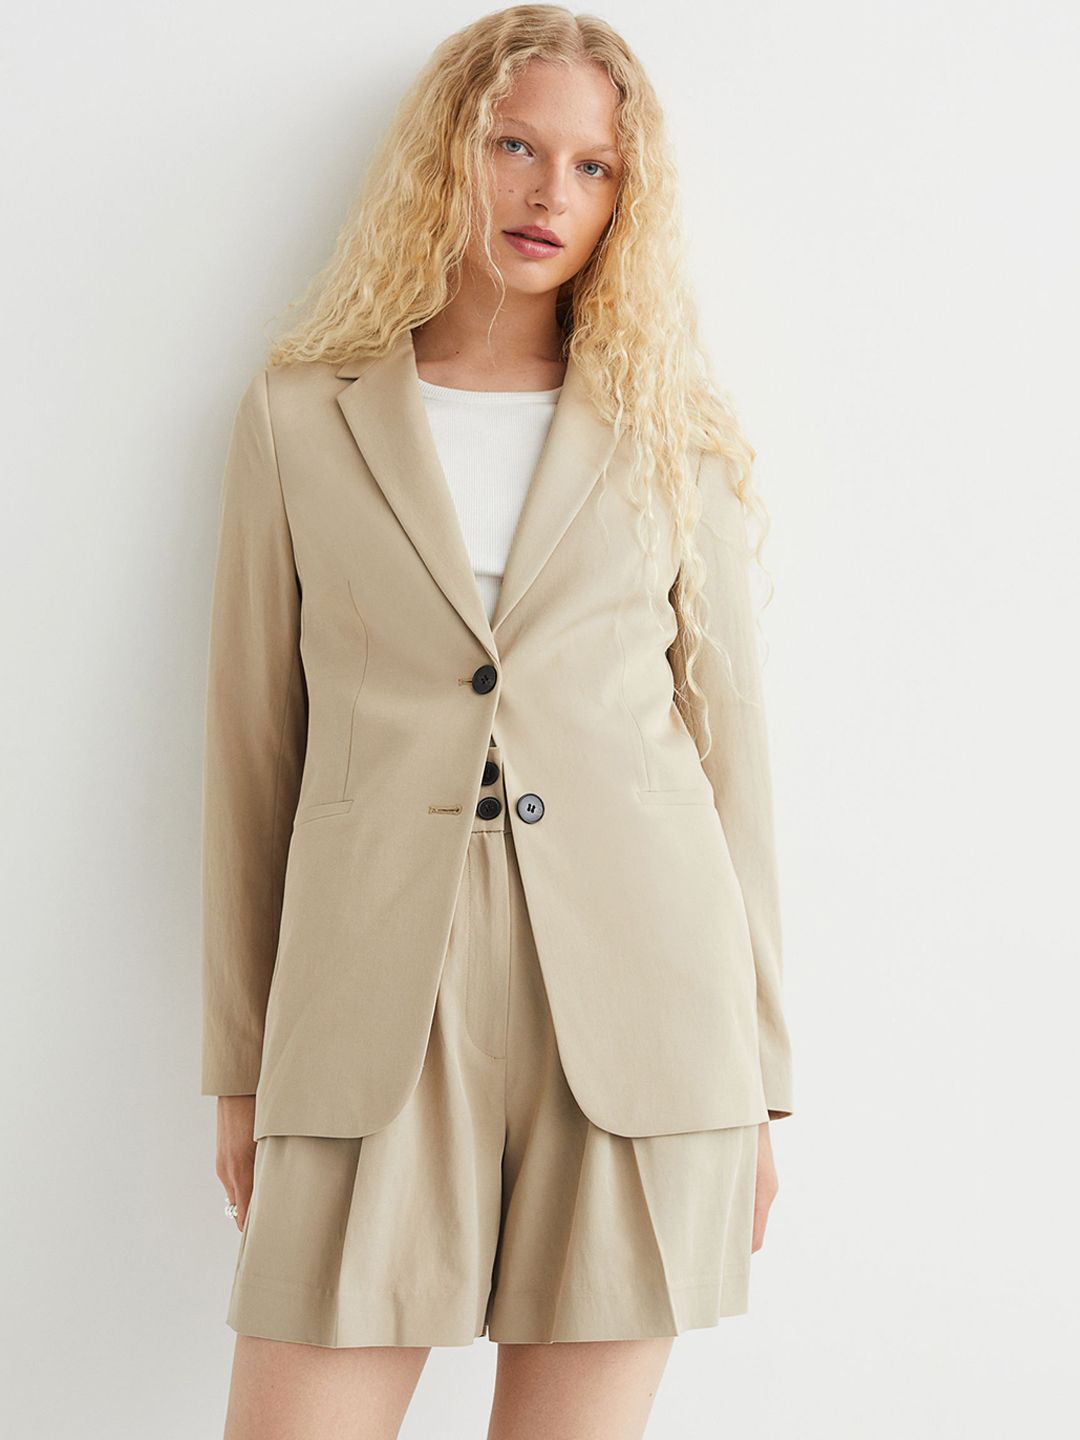 H&M Women Beige Tailored Fit Single-Breasted Jacket Price in India